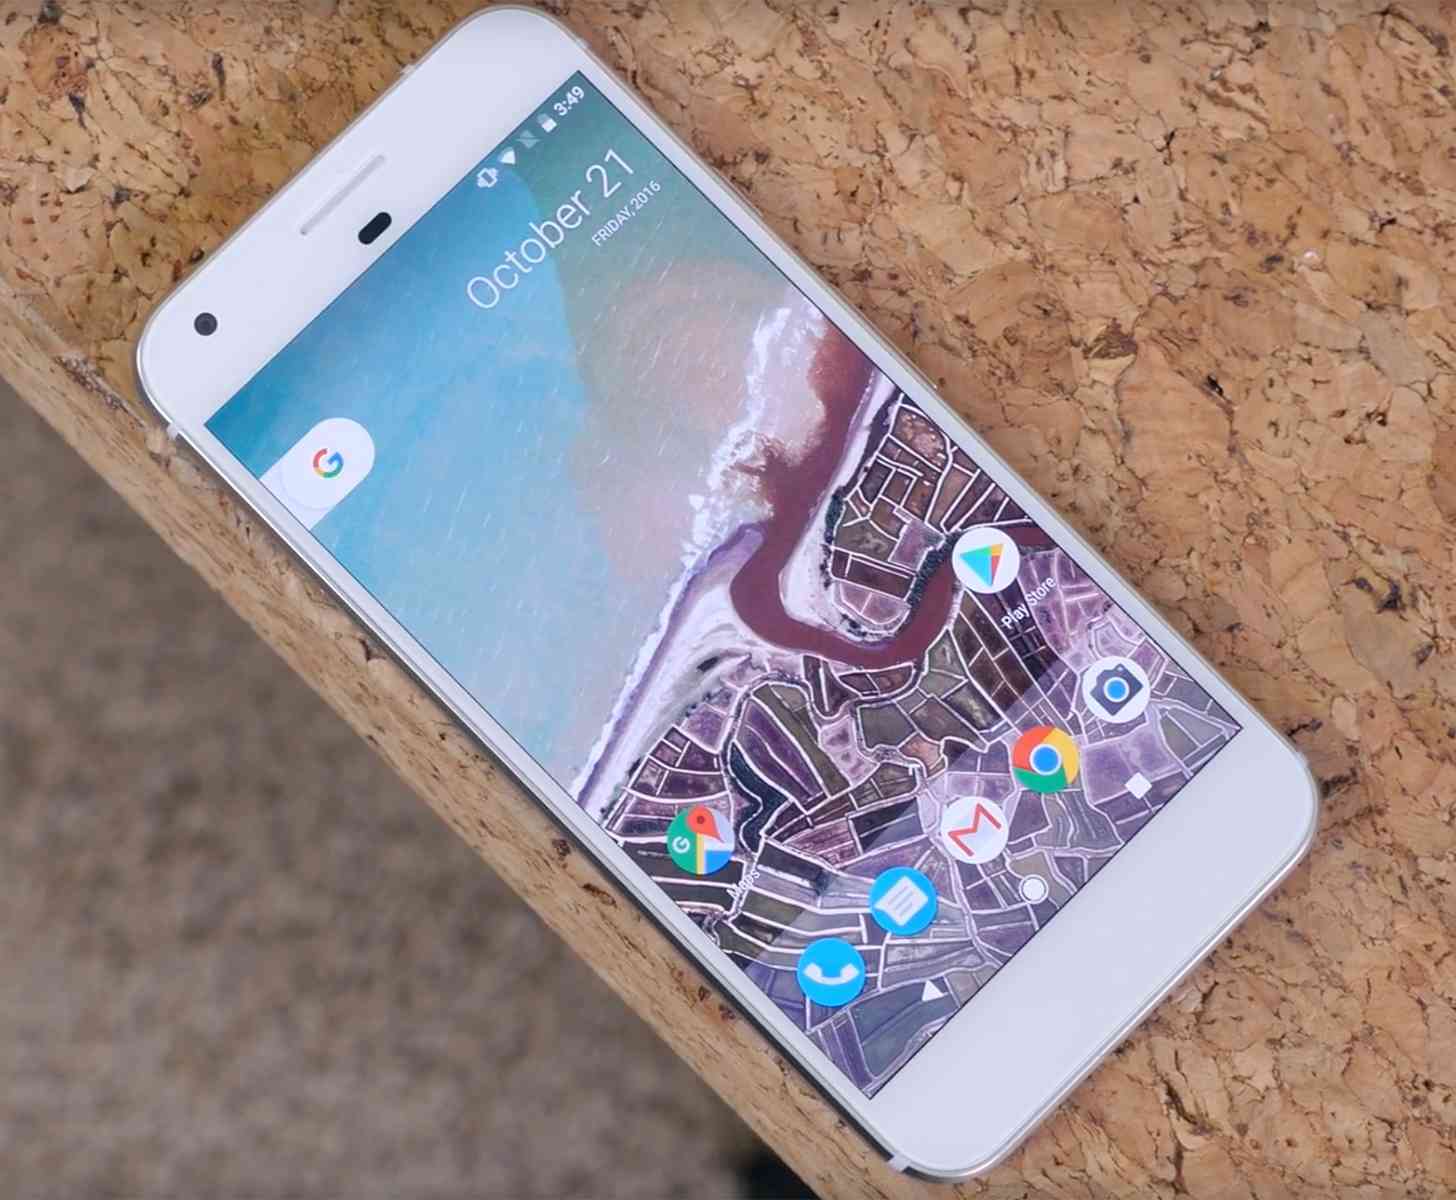 Google Pixel hands-on angle